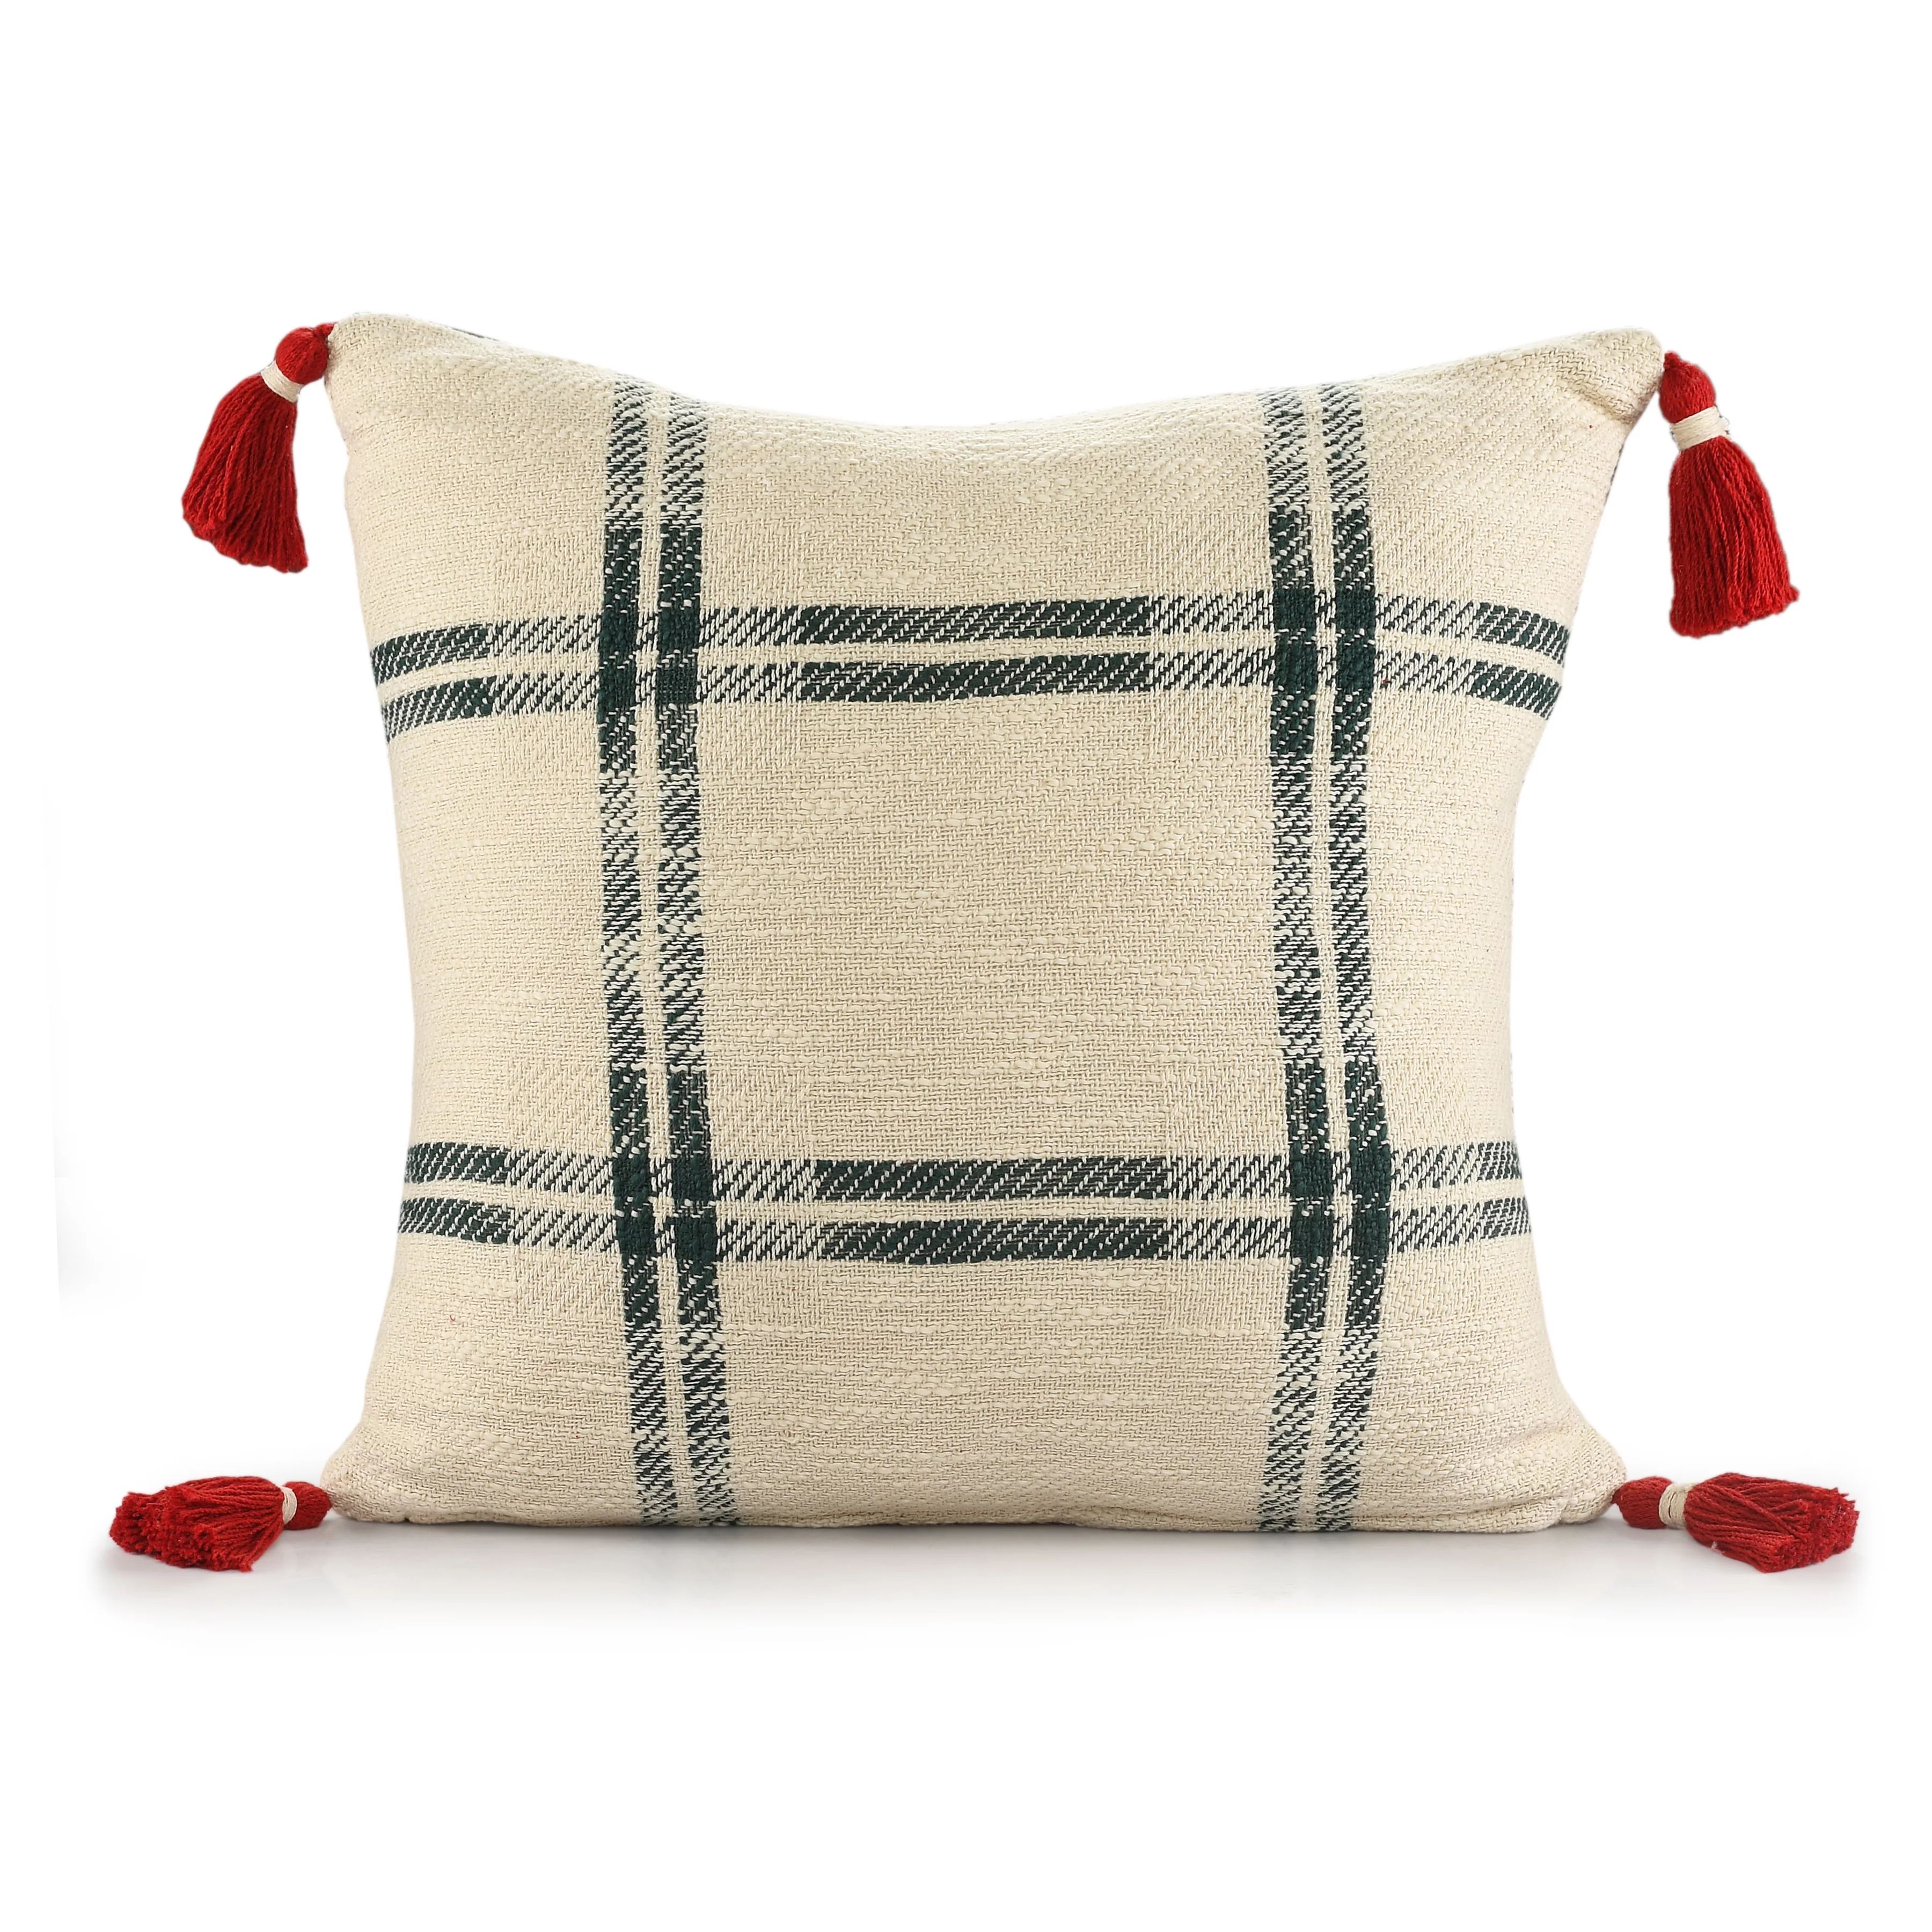 Ox Bay Holiday Plaid Throw Pillow, Ivory / Green / Red, 20" x 20", Count per Pack 1 | Walmart (US)